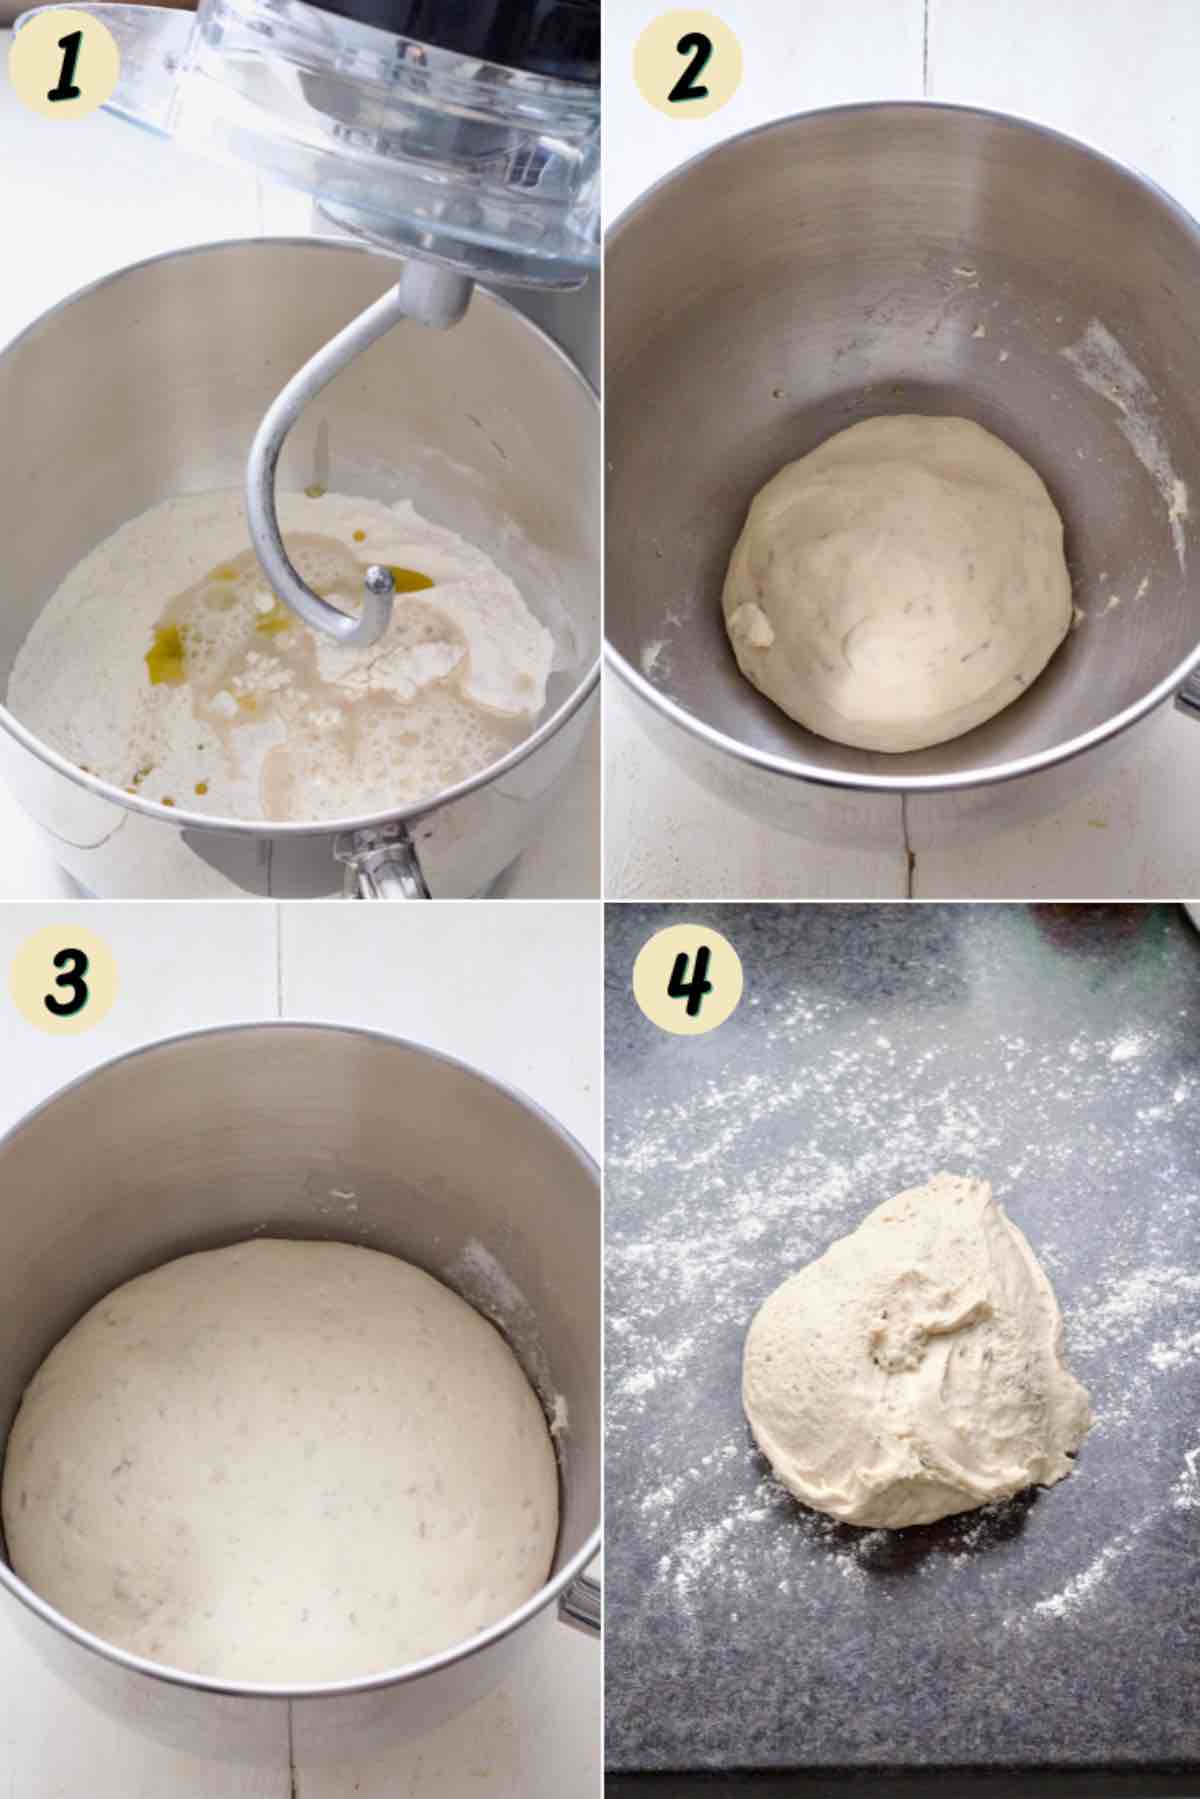 Making and proving bread dough.